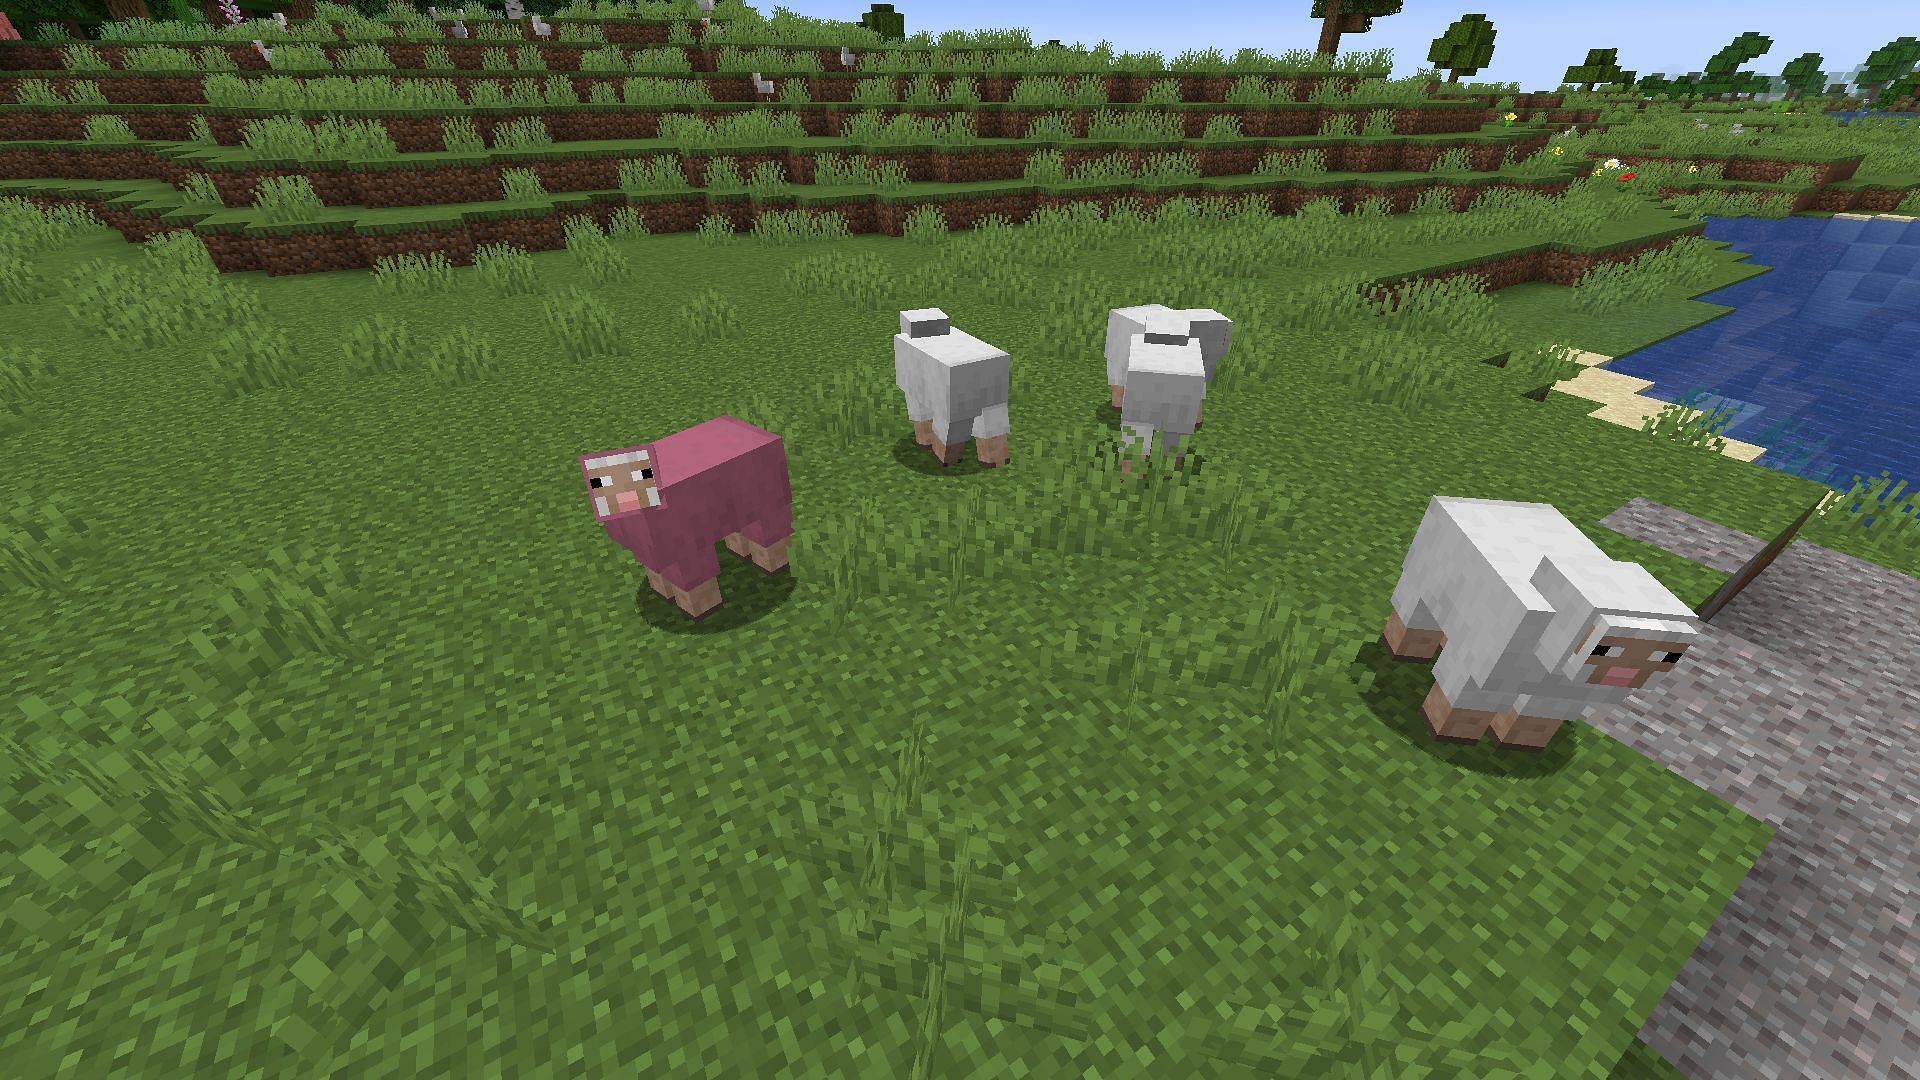 An example of a herd of sheep, including a rare pink sheep (Image via Minecraft)